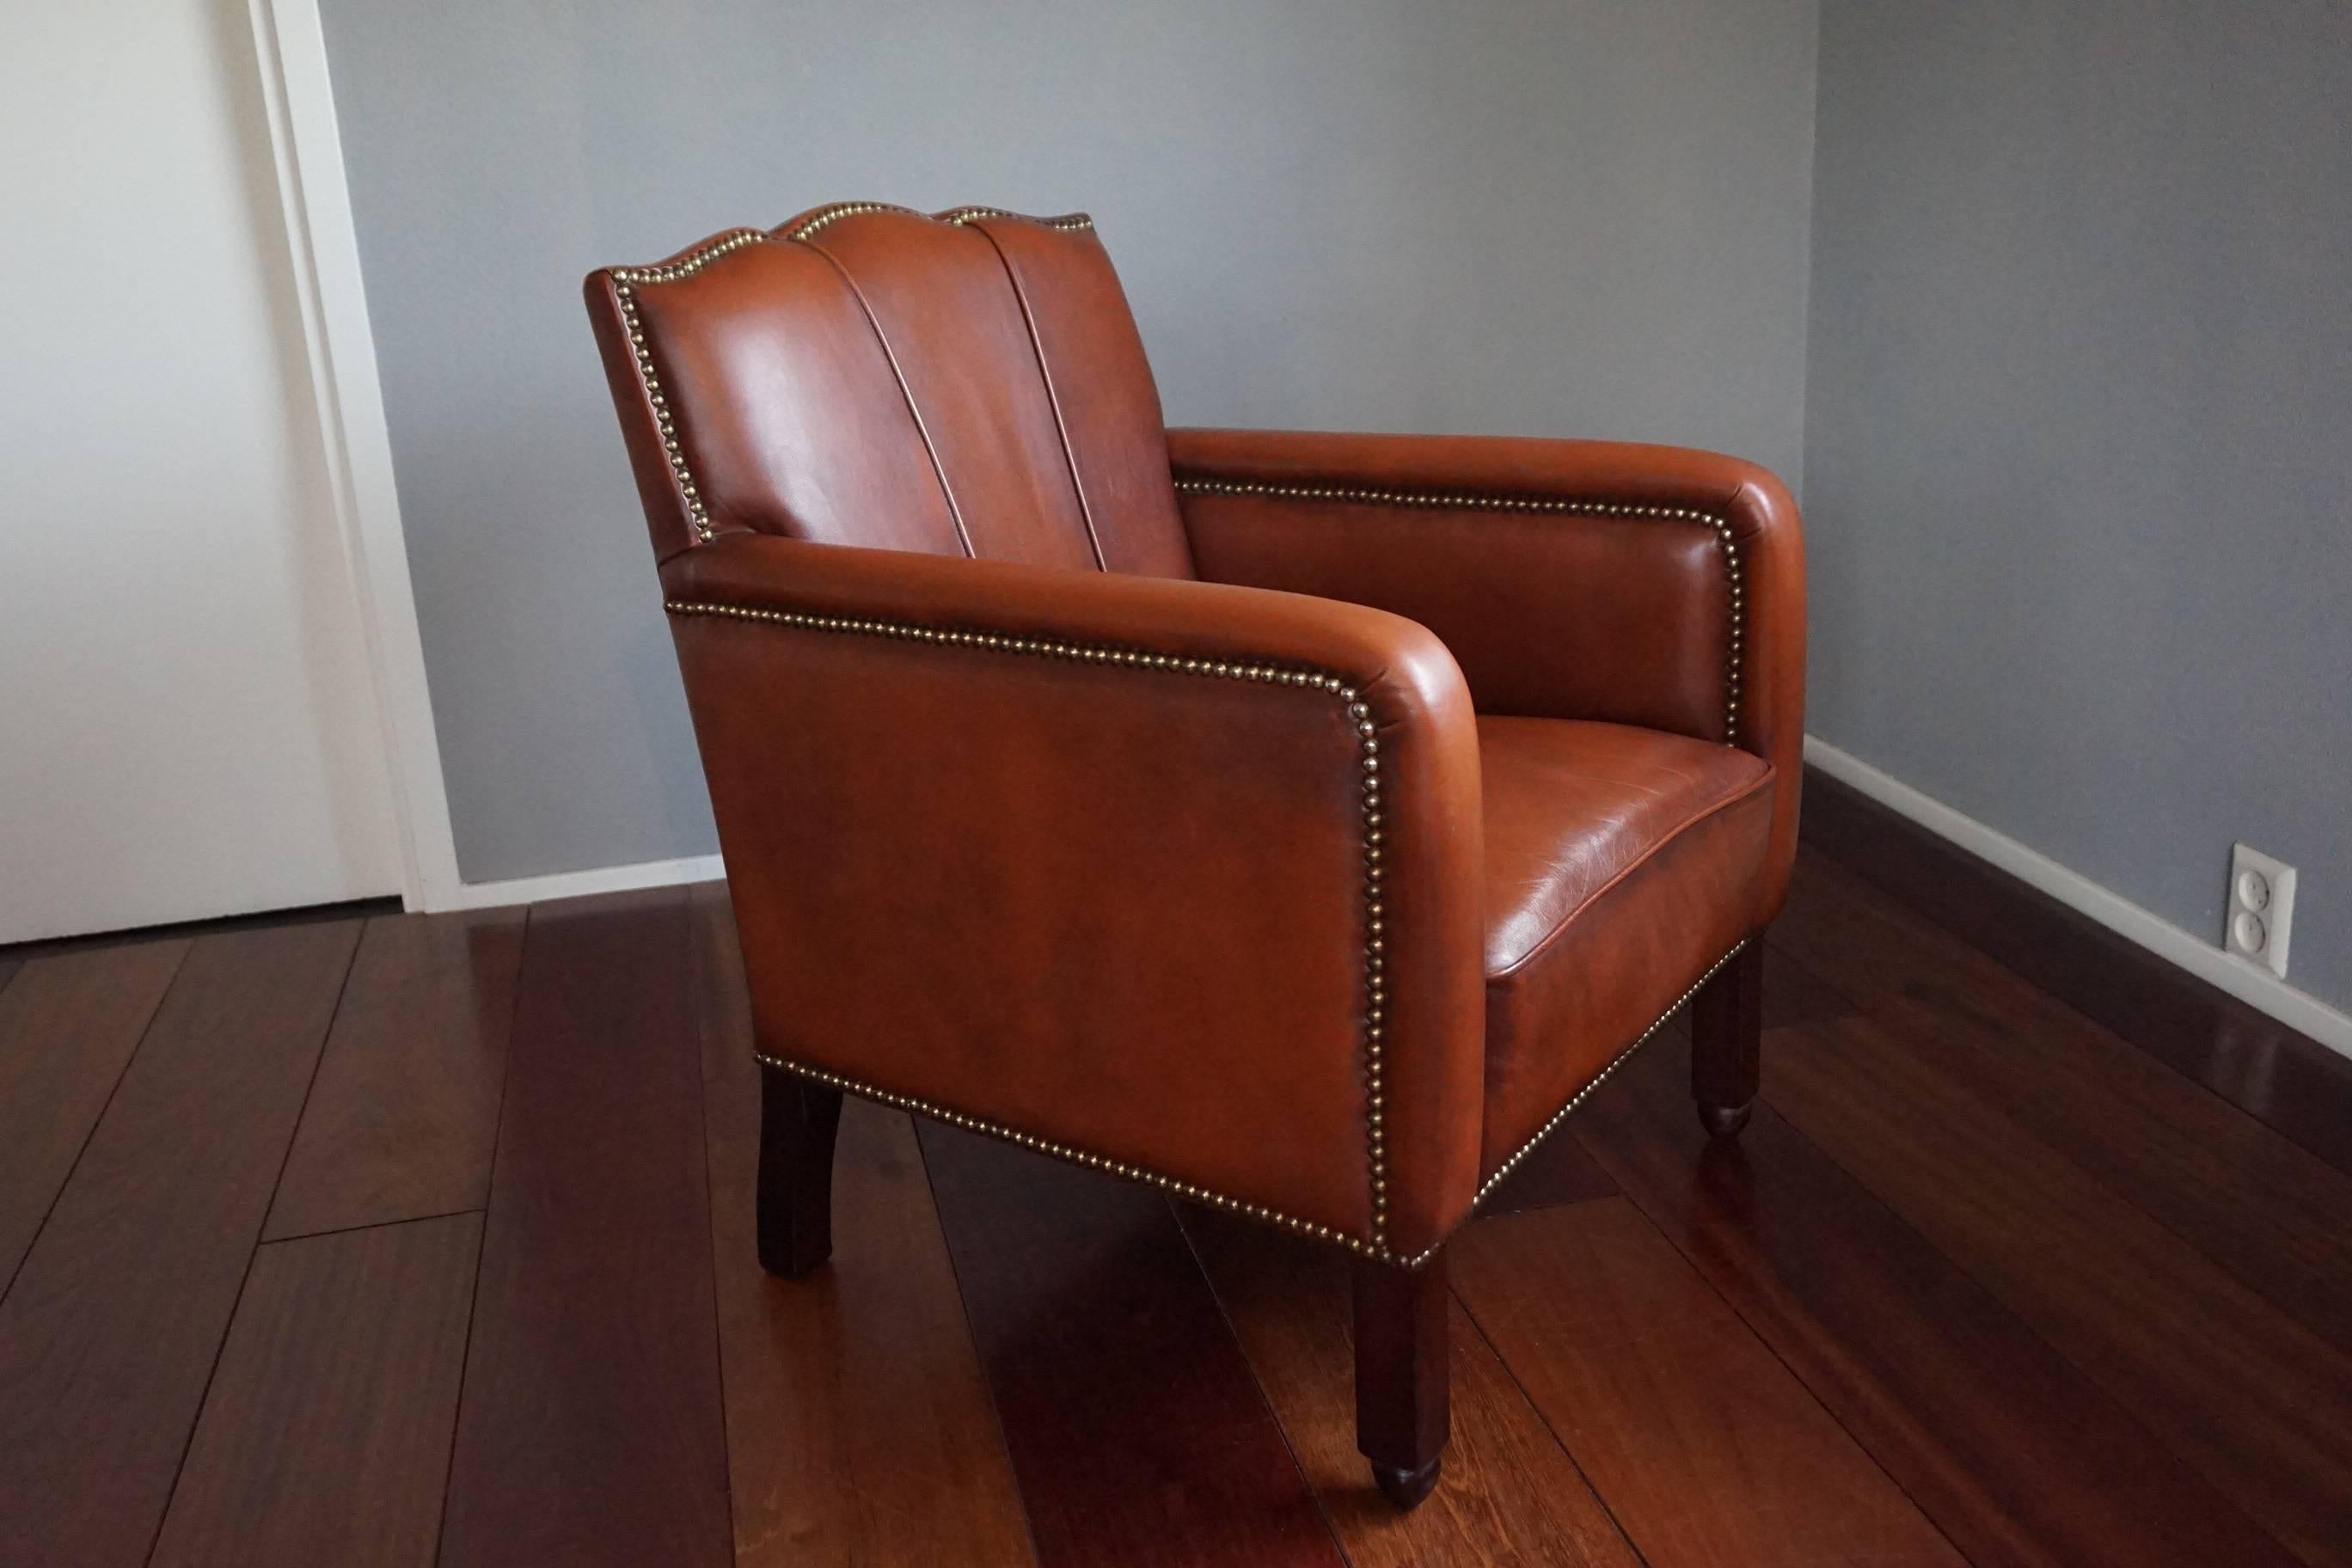 Small size Art Deco ladies chair.

This rare model and rare size Art Deco ladies chair has the most beautiful lines. These wonderful lines are accentuated by the stylish, brass furniture nails and the combination makes this chair very pleasing to